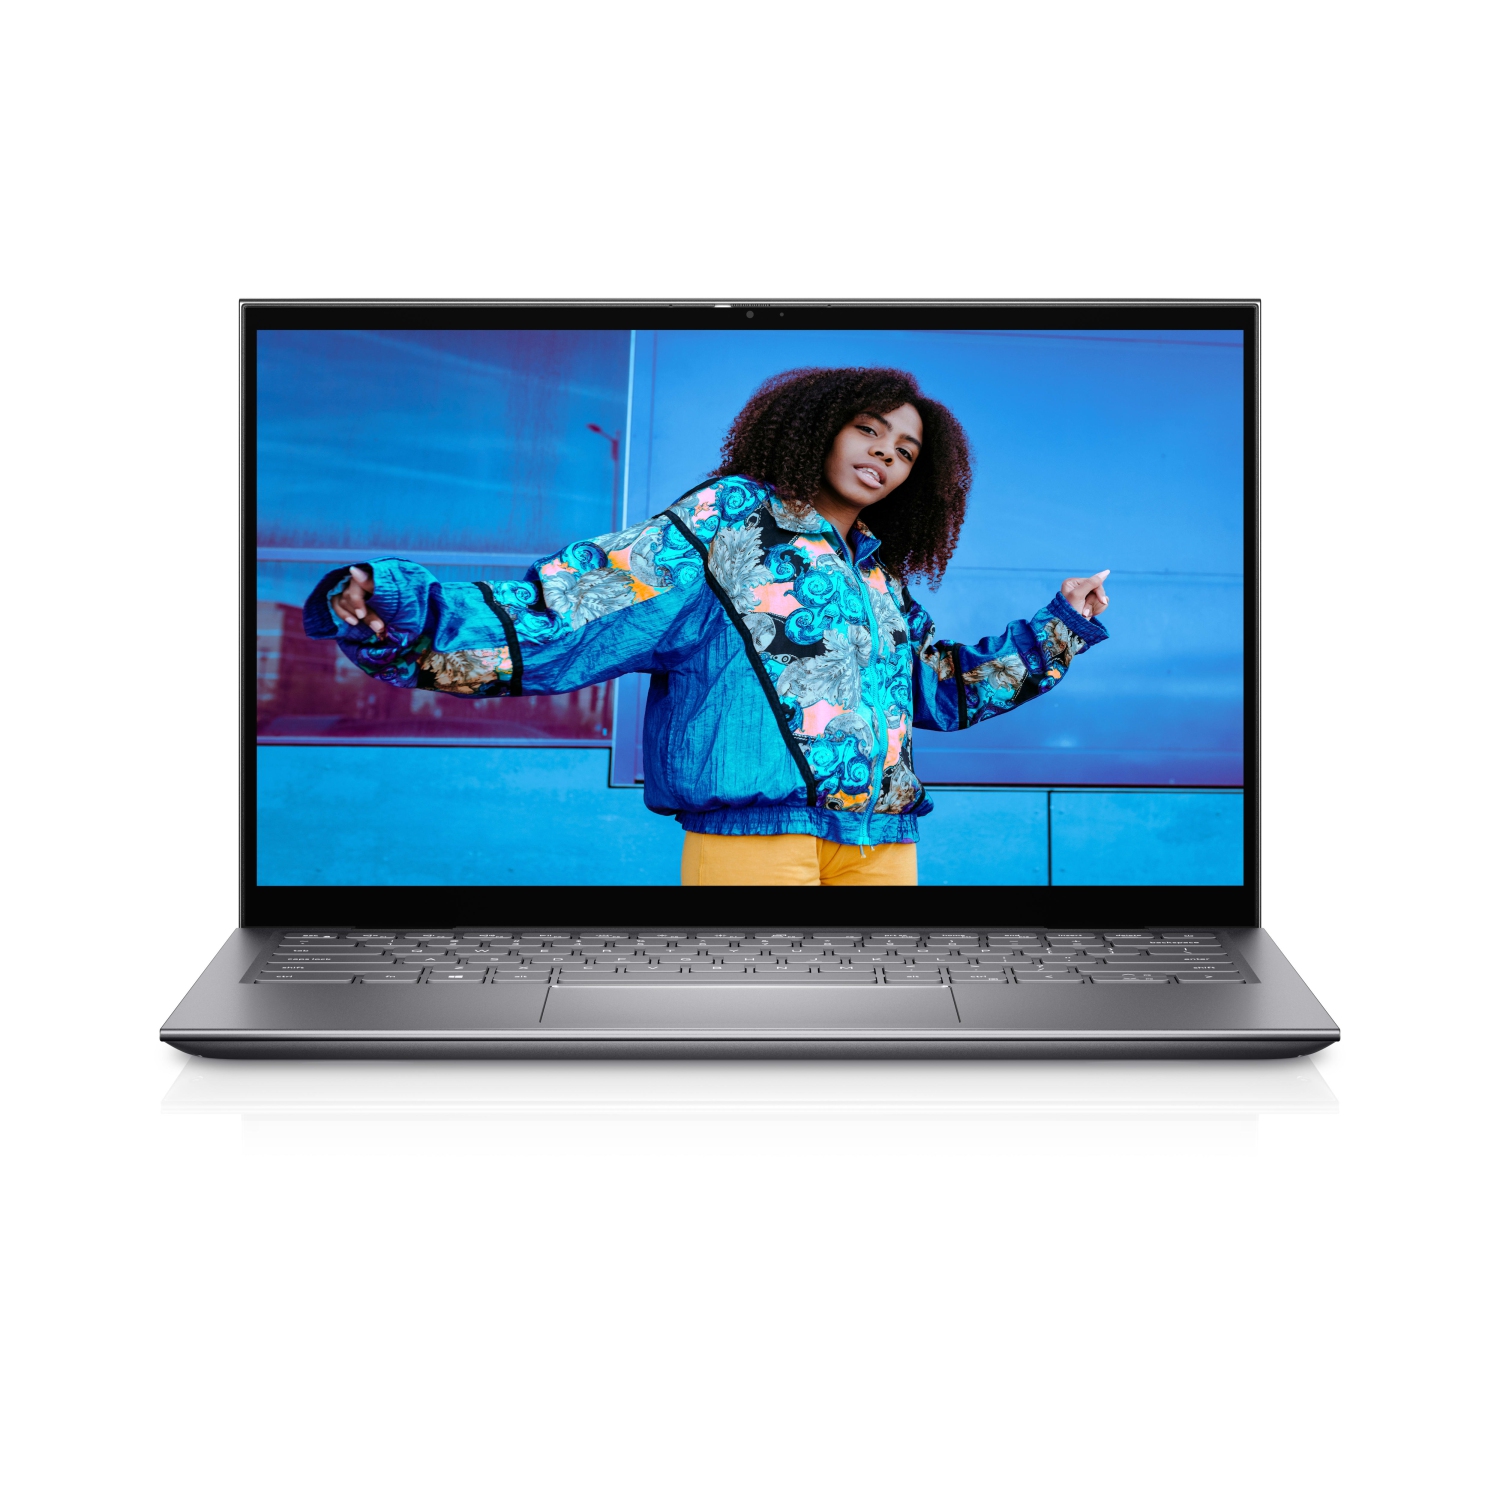 Refurbished (Excellent) – Dell Inspiron 5410 2-in-1 (2021) | 14" FHD Touch | Core i5 - 2TB SSD - 8GB RAM | 4 Cores @ 4.5 GHz - 11th Gen CPU